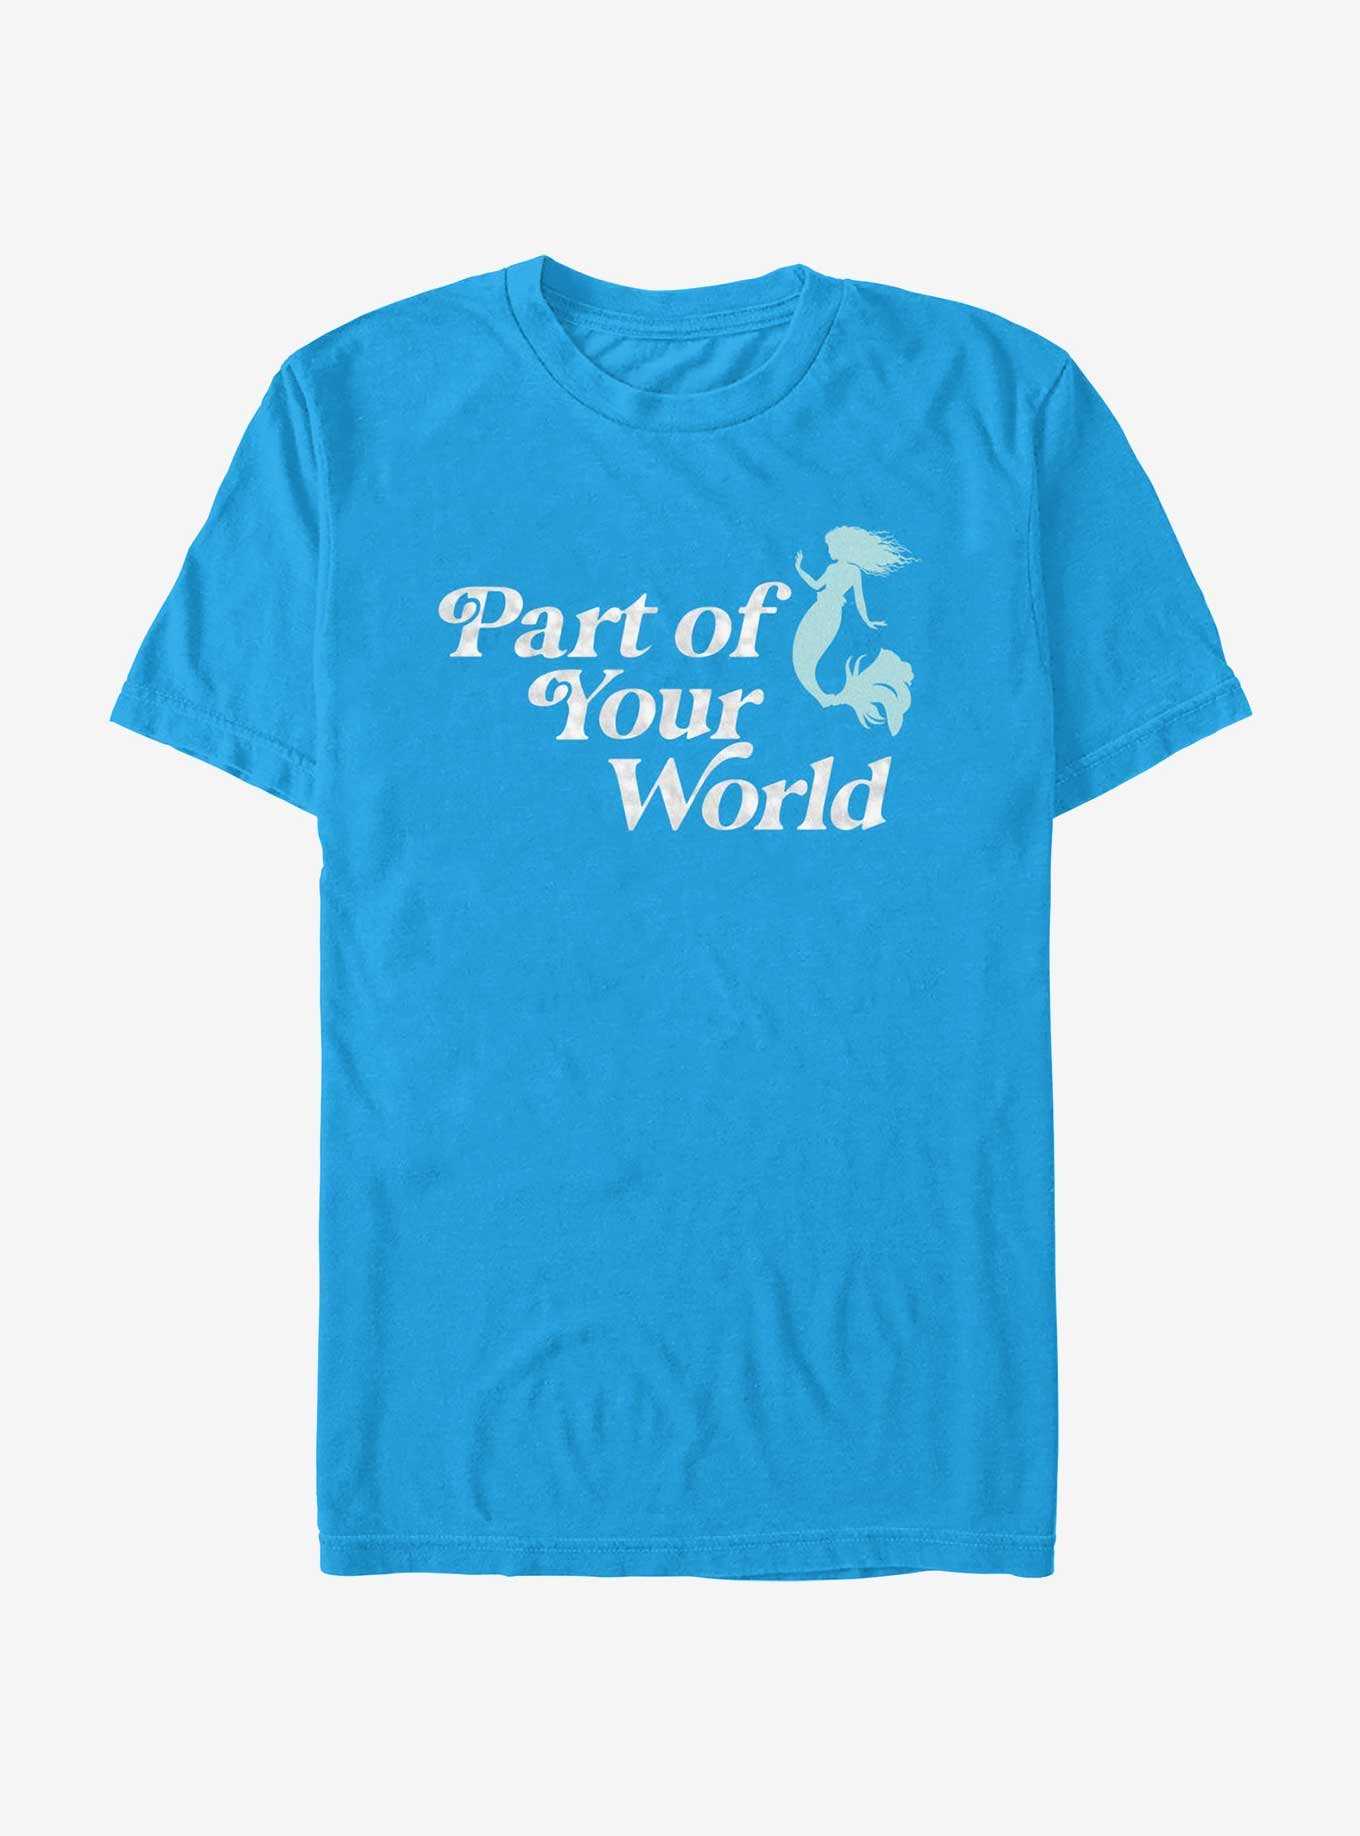 Disney The Little Mermaid Live Action Part of Your World T-Shirt, , hi-res